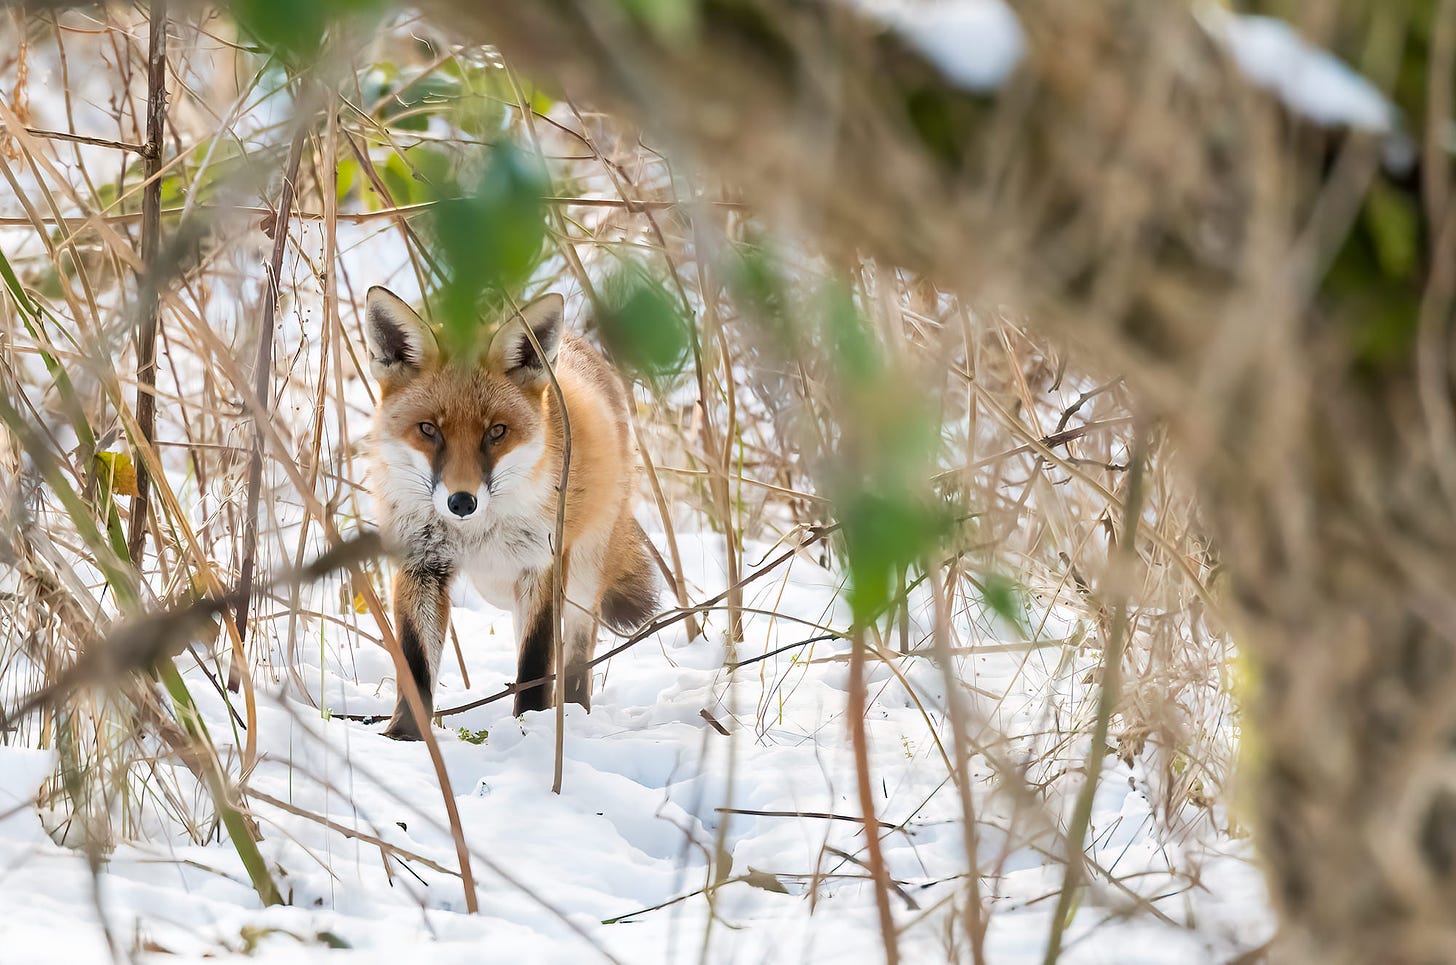 Photo of a red fox walking through snow in between long grass and brambles